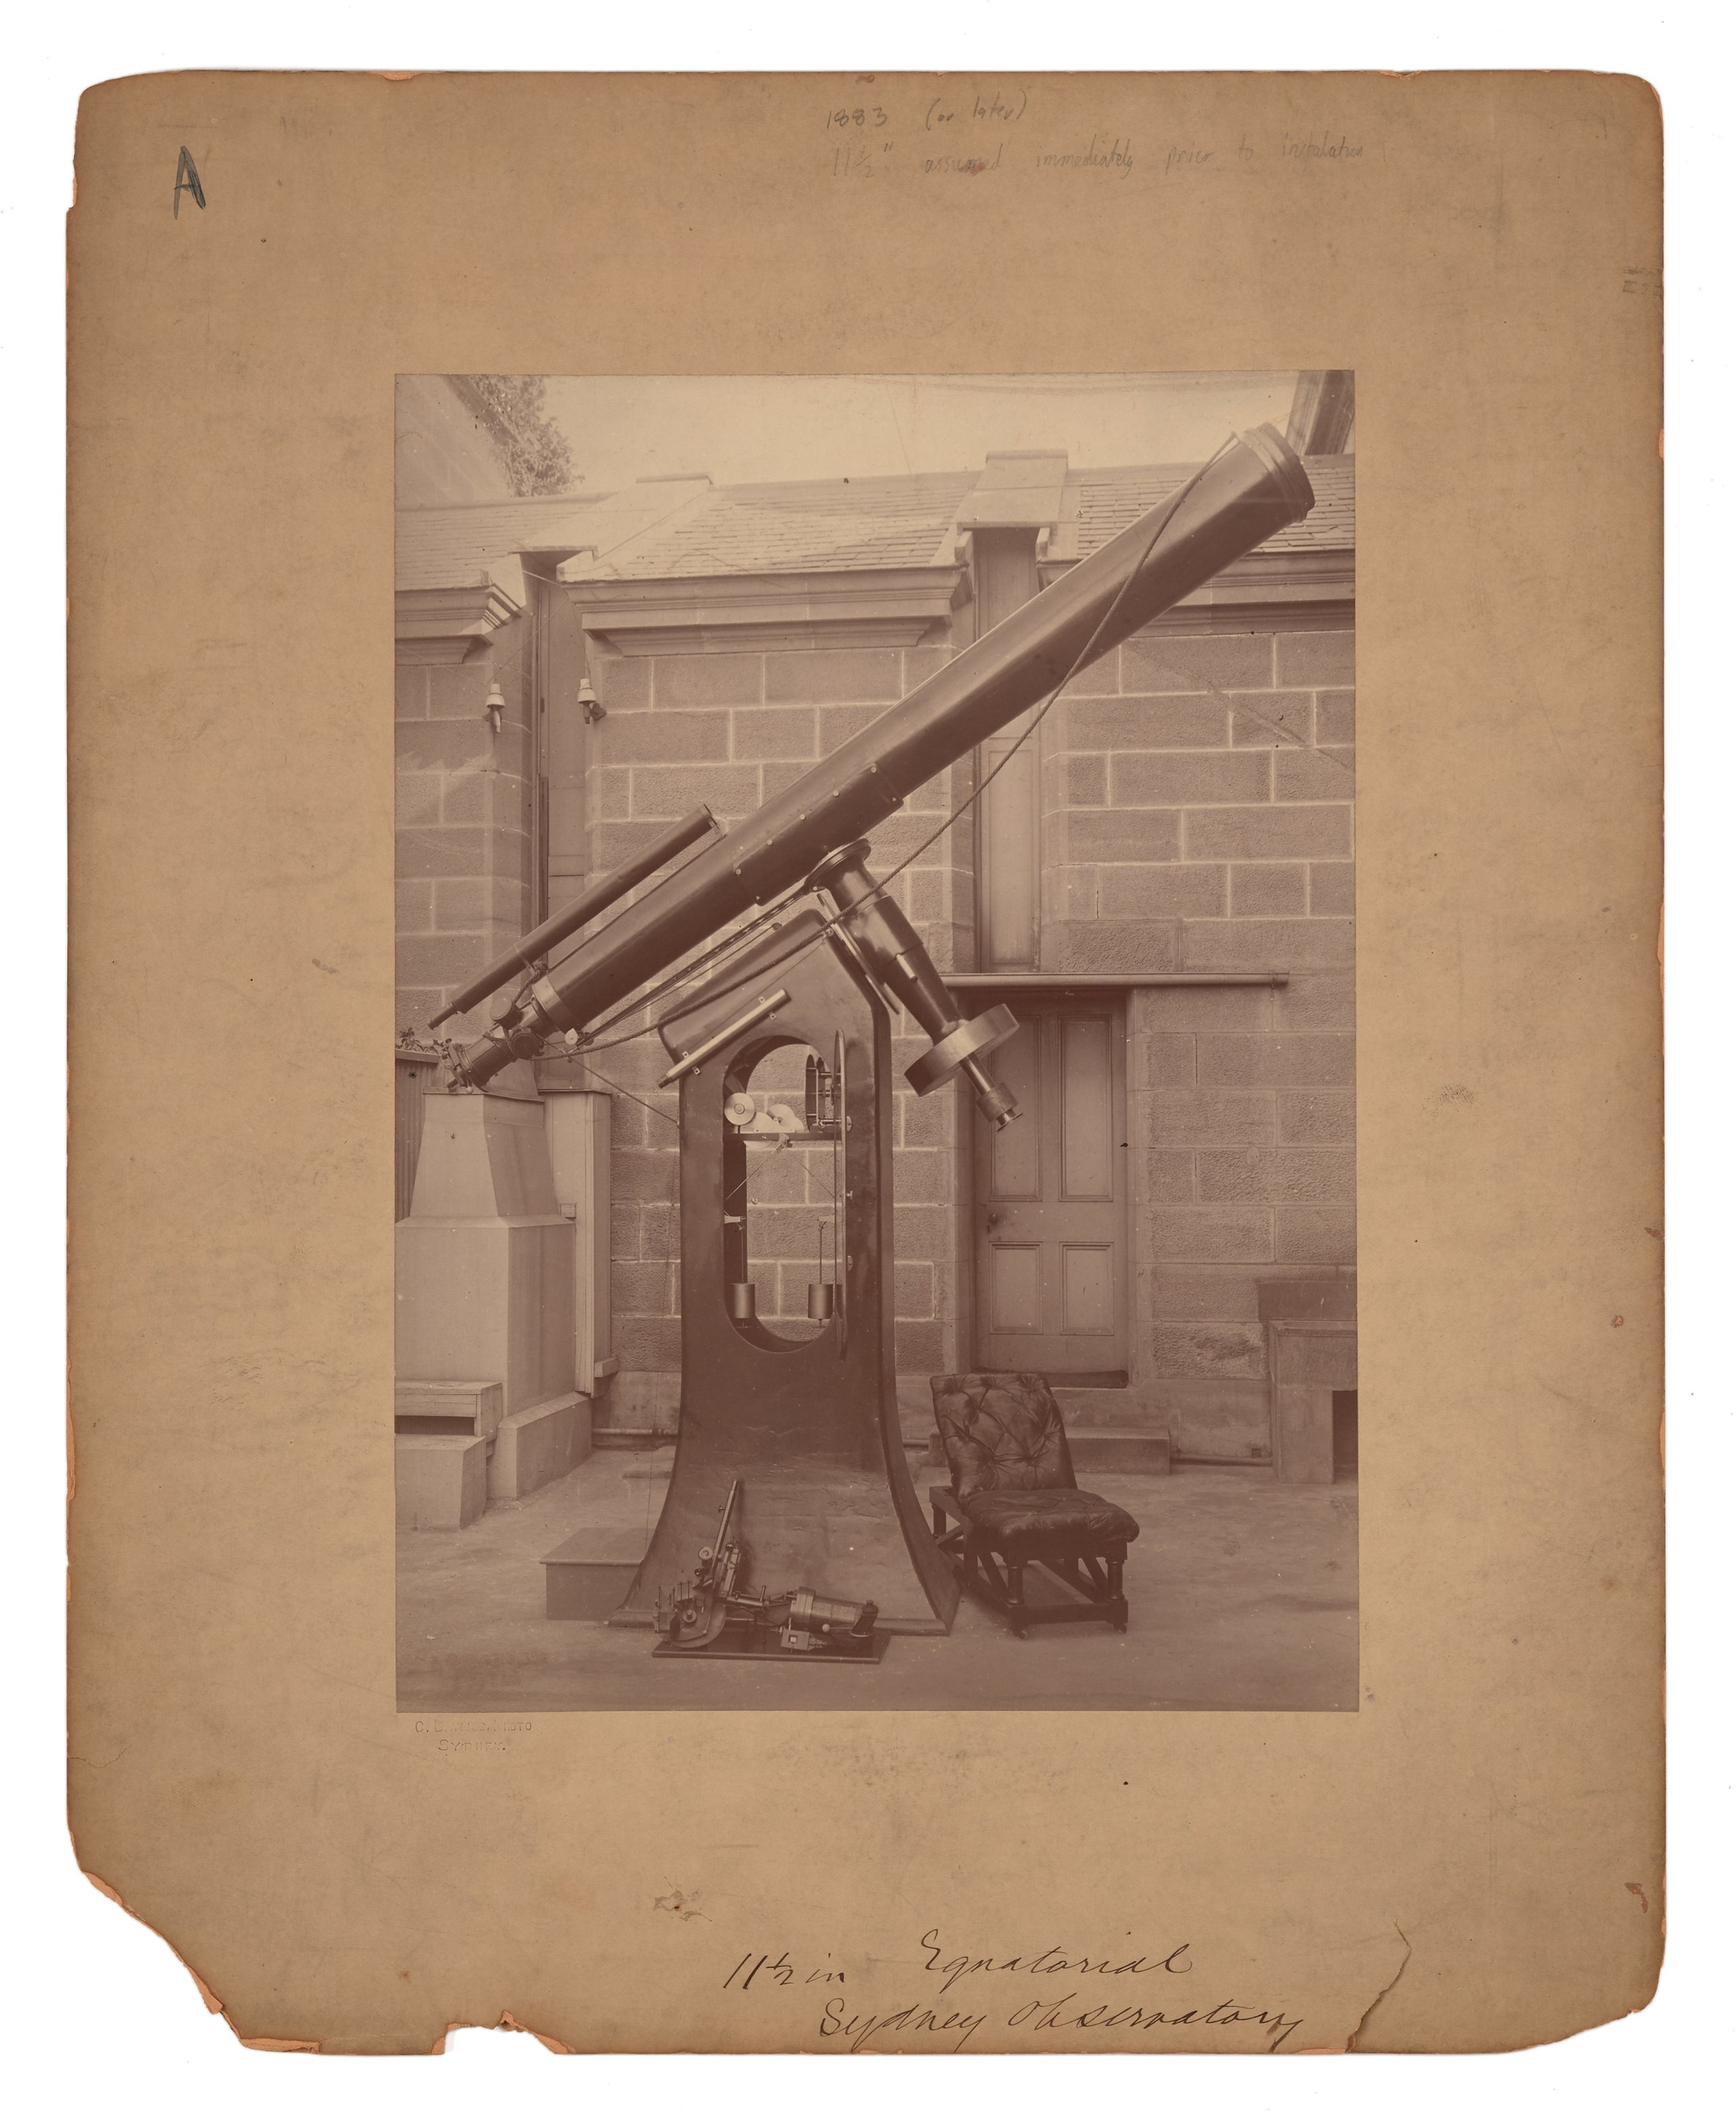 Photograph of equitorial telescopea at Sydney Observatory